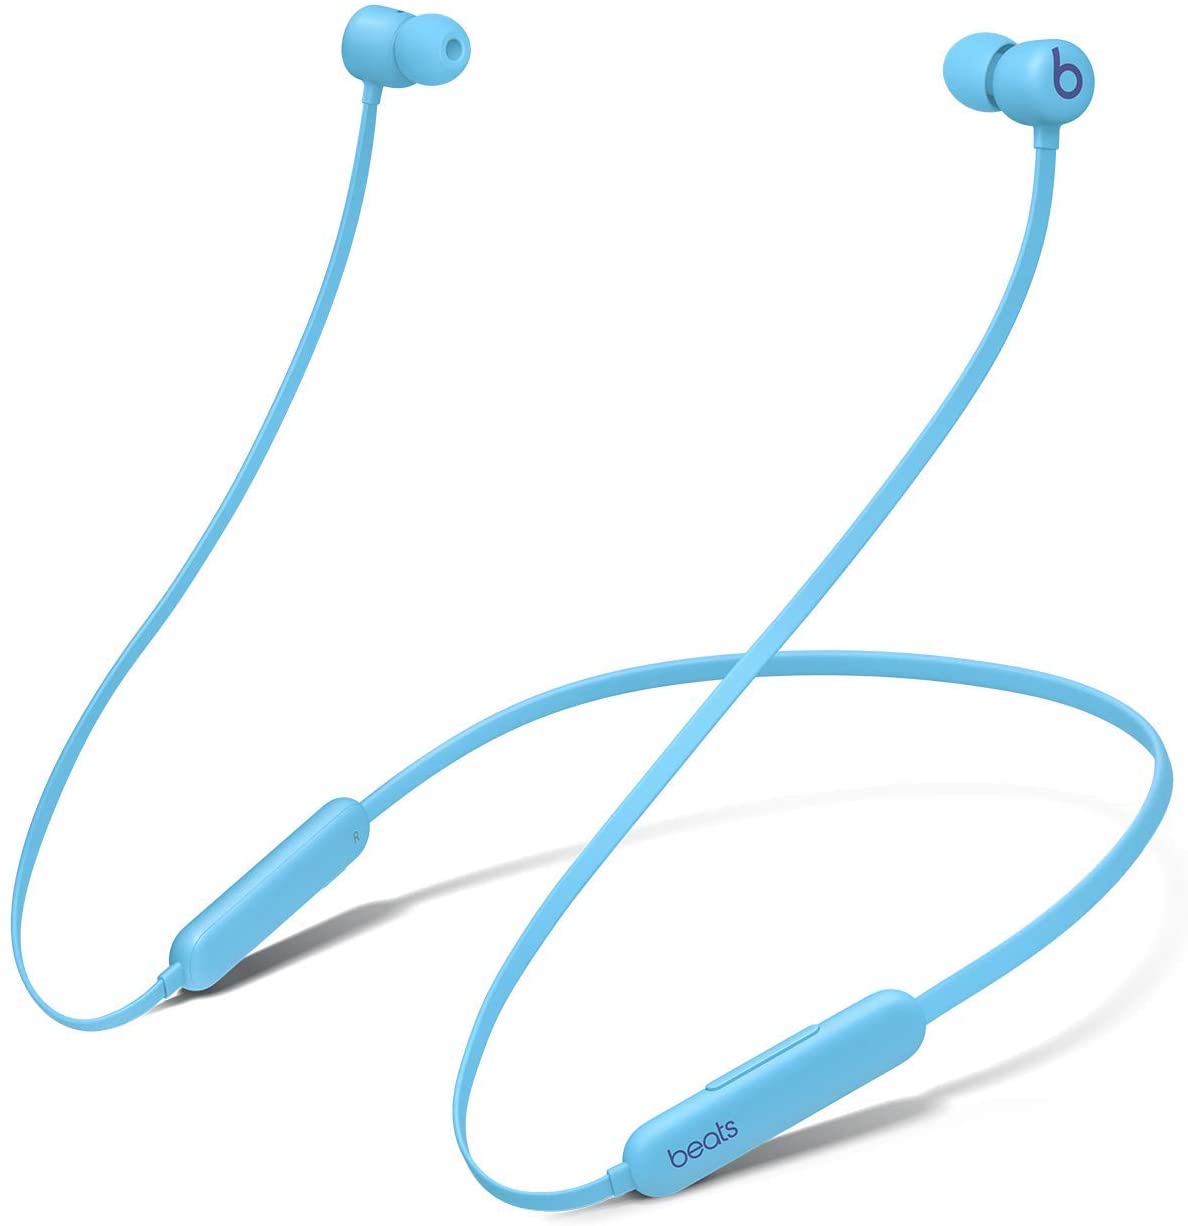 Beats Flex Wireless Portable Bluetooth Earbuds Built-in Microphone - Flame Blue (Refurbished)